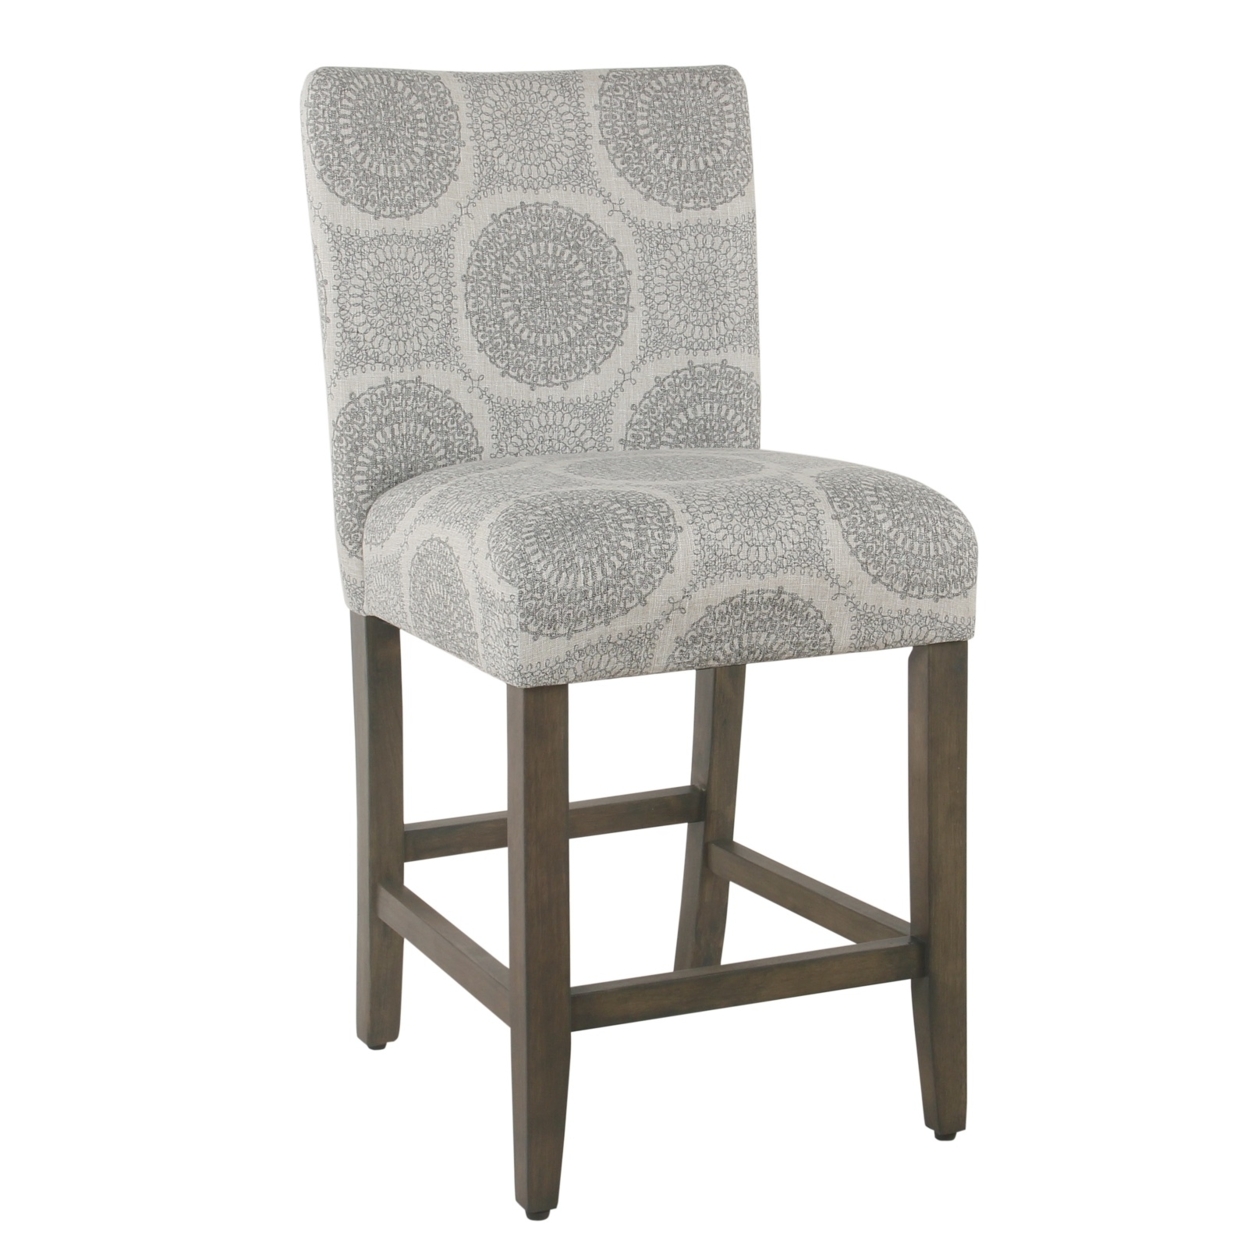 Wooden Counter Height Stool With Medallion Pattern Fabric Upholstery, Gray- Saltoro Sherpi